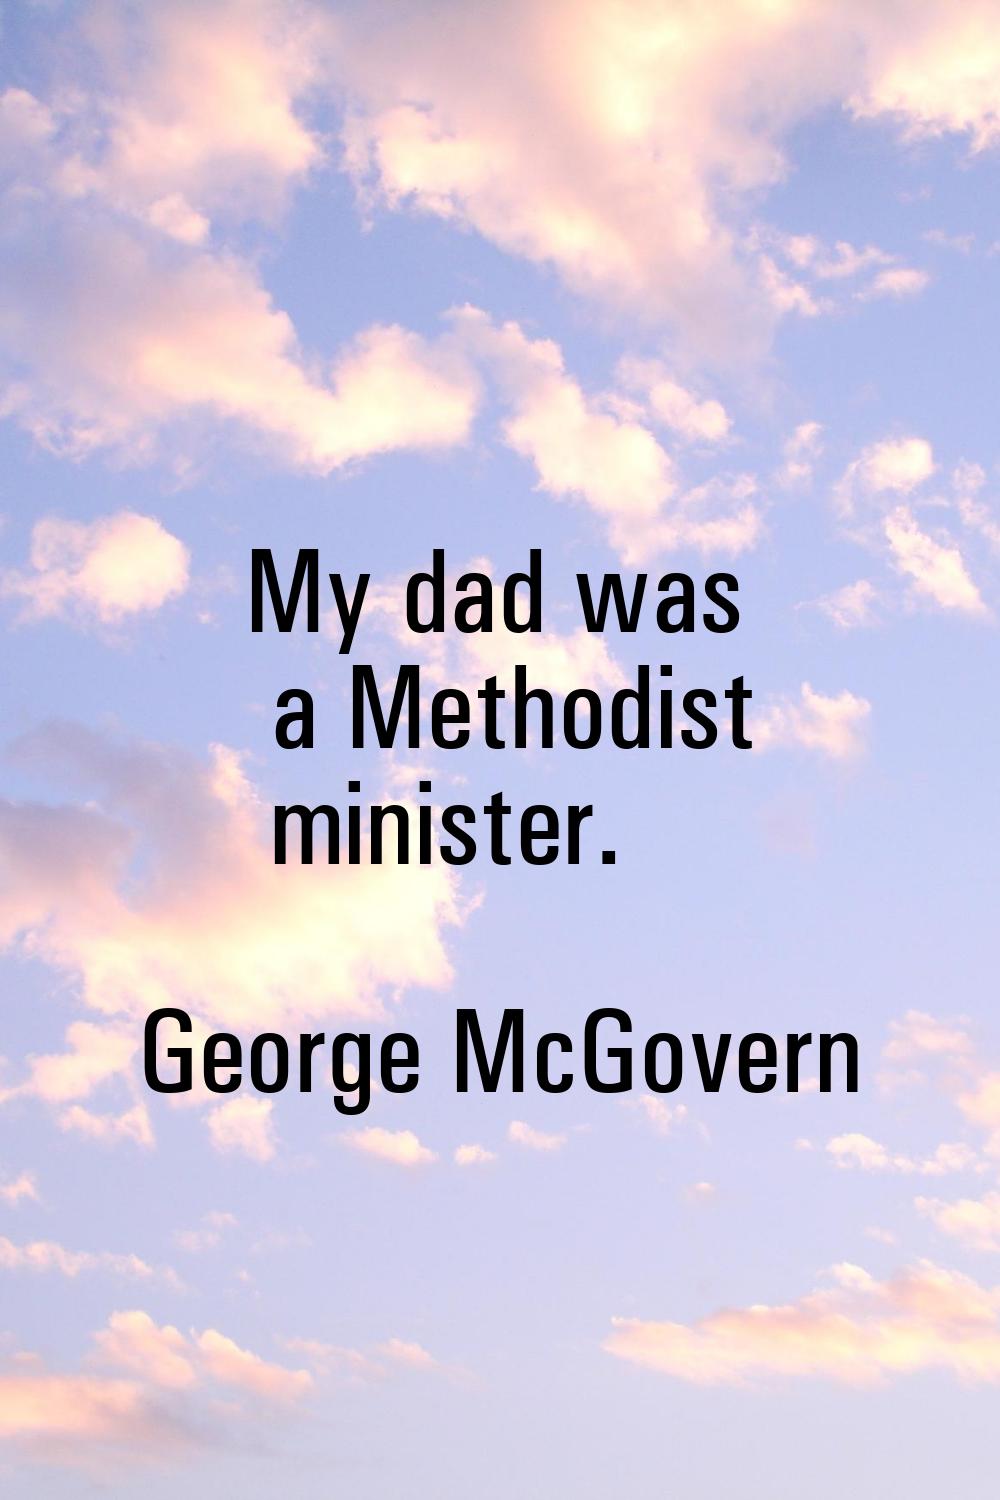 My dad was a Methodist minister.